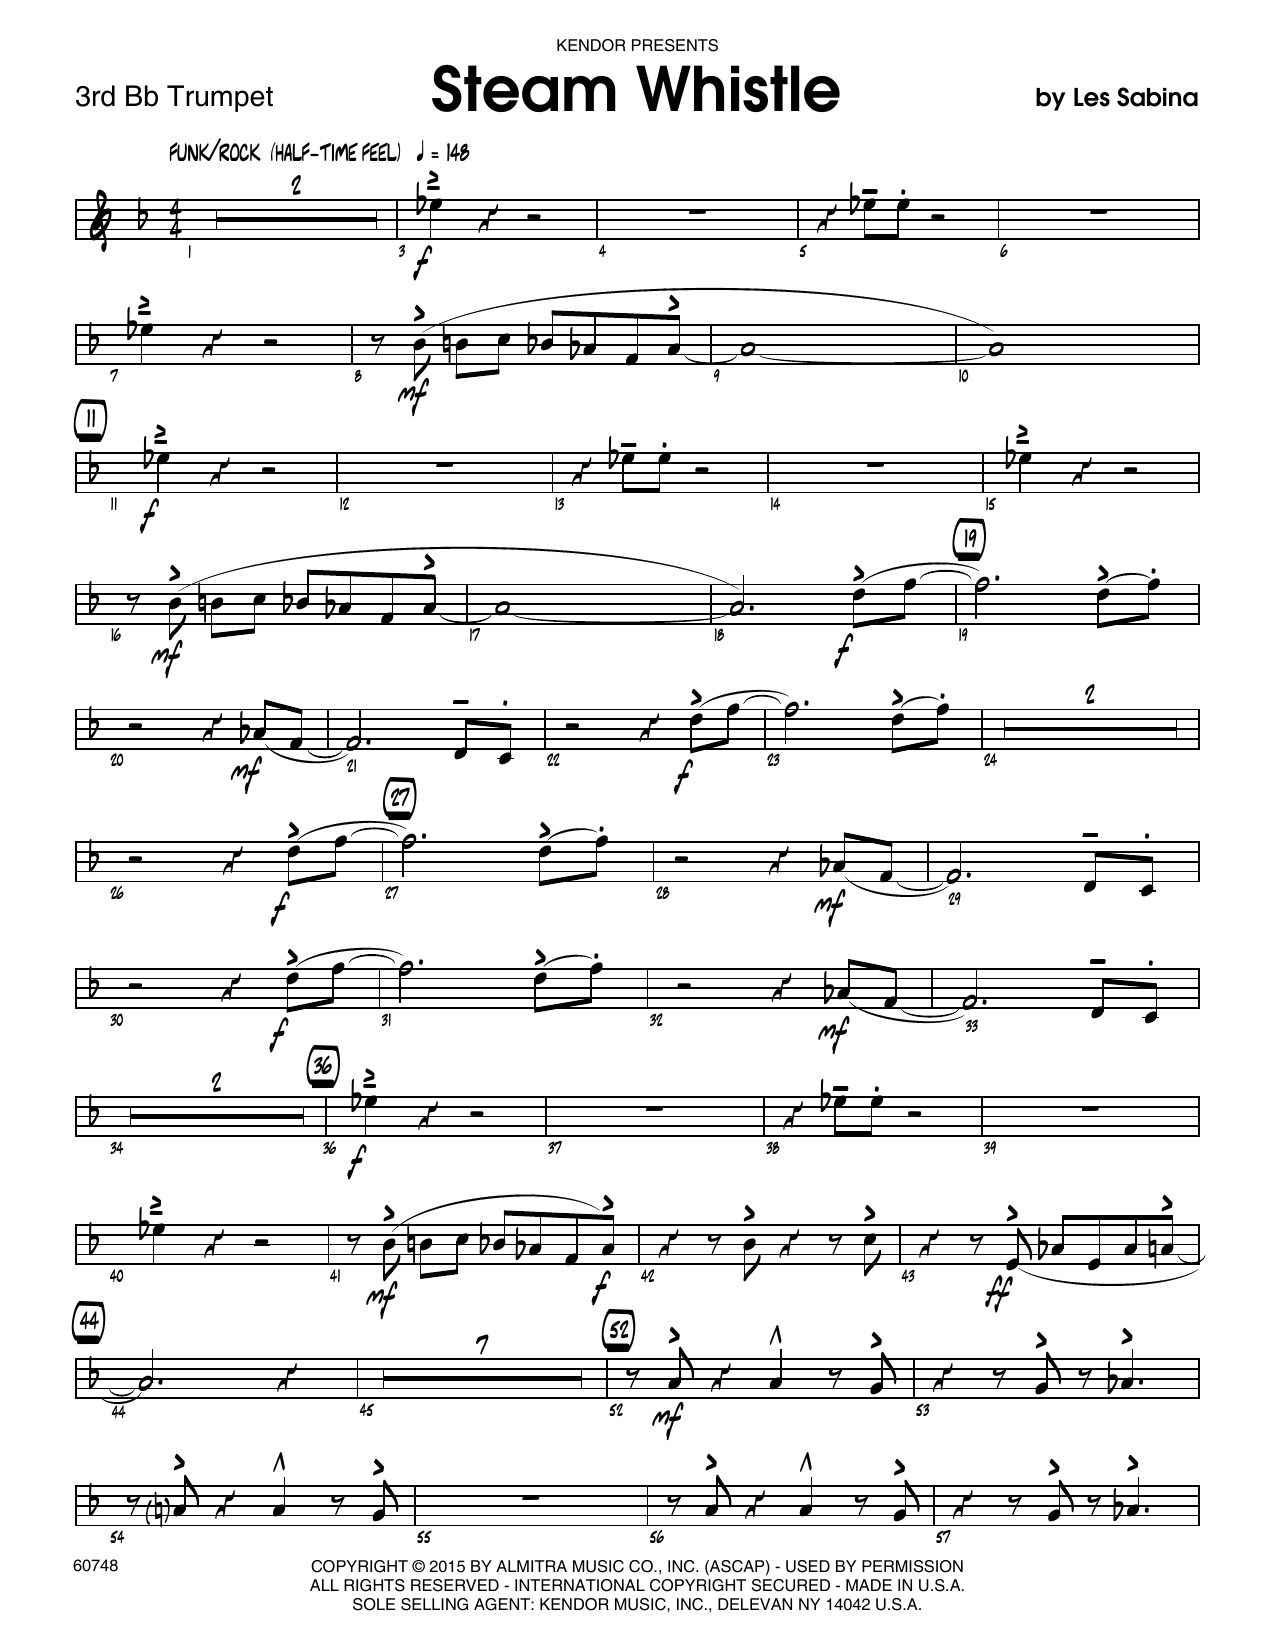 Download Les Sabina Steam Whistle - 3rd Bb Trumpet Sheet Music